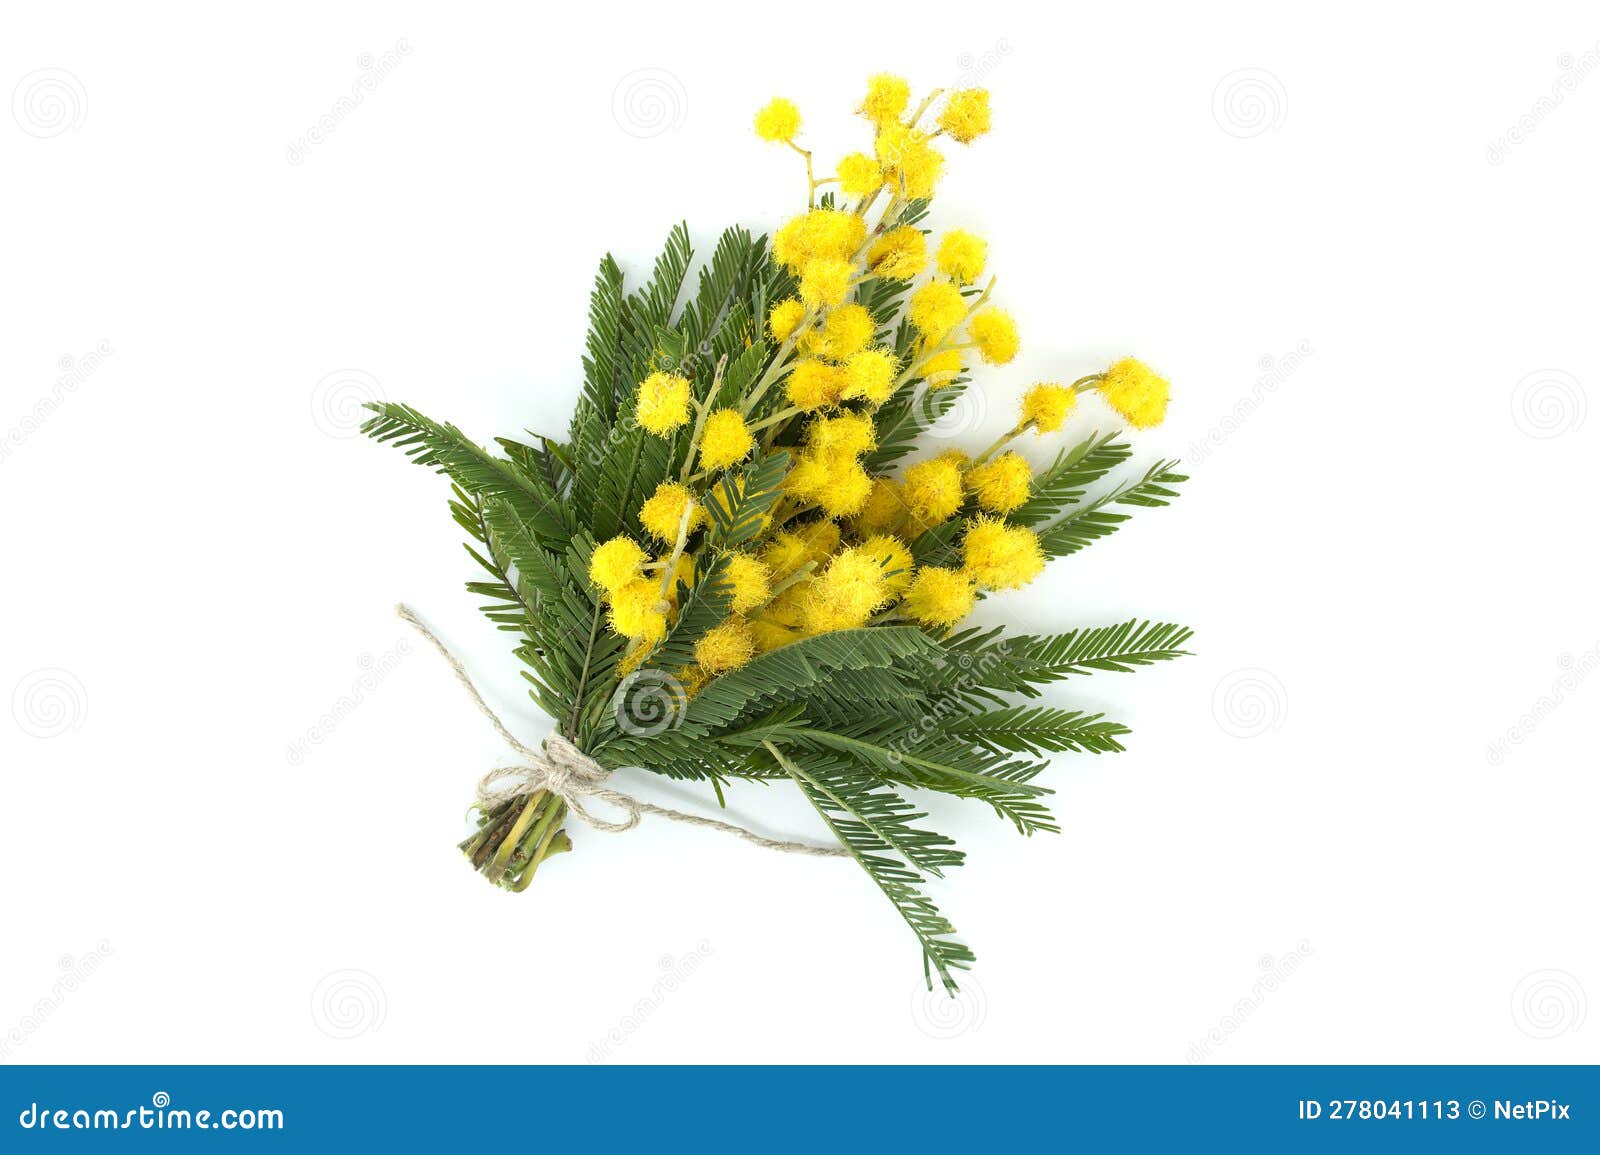 Mimosa Flowers Bouquet Yellow Fluffy Balls And Leaves Stock Image